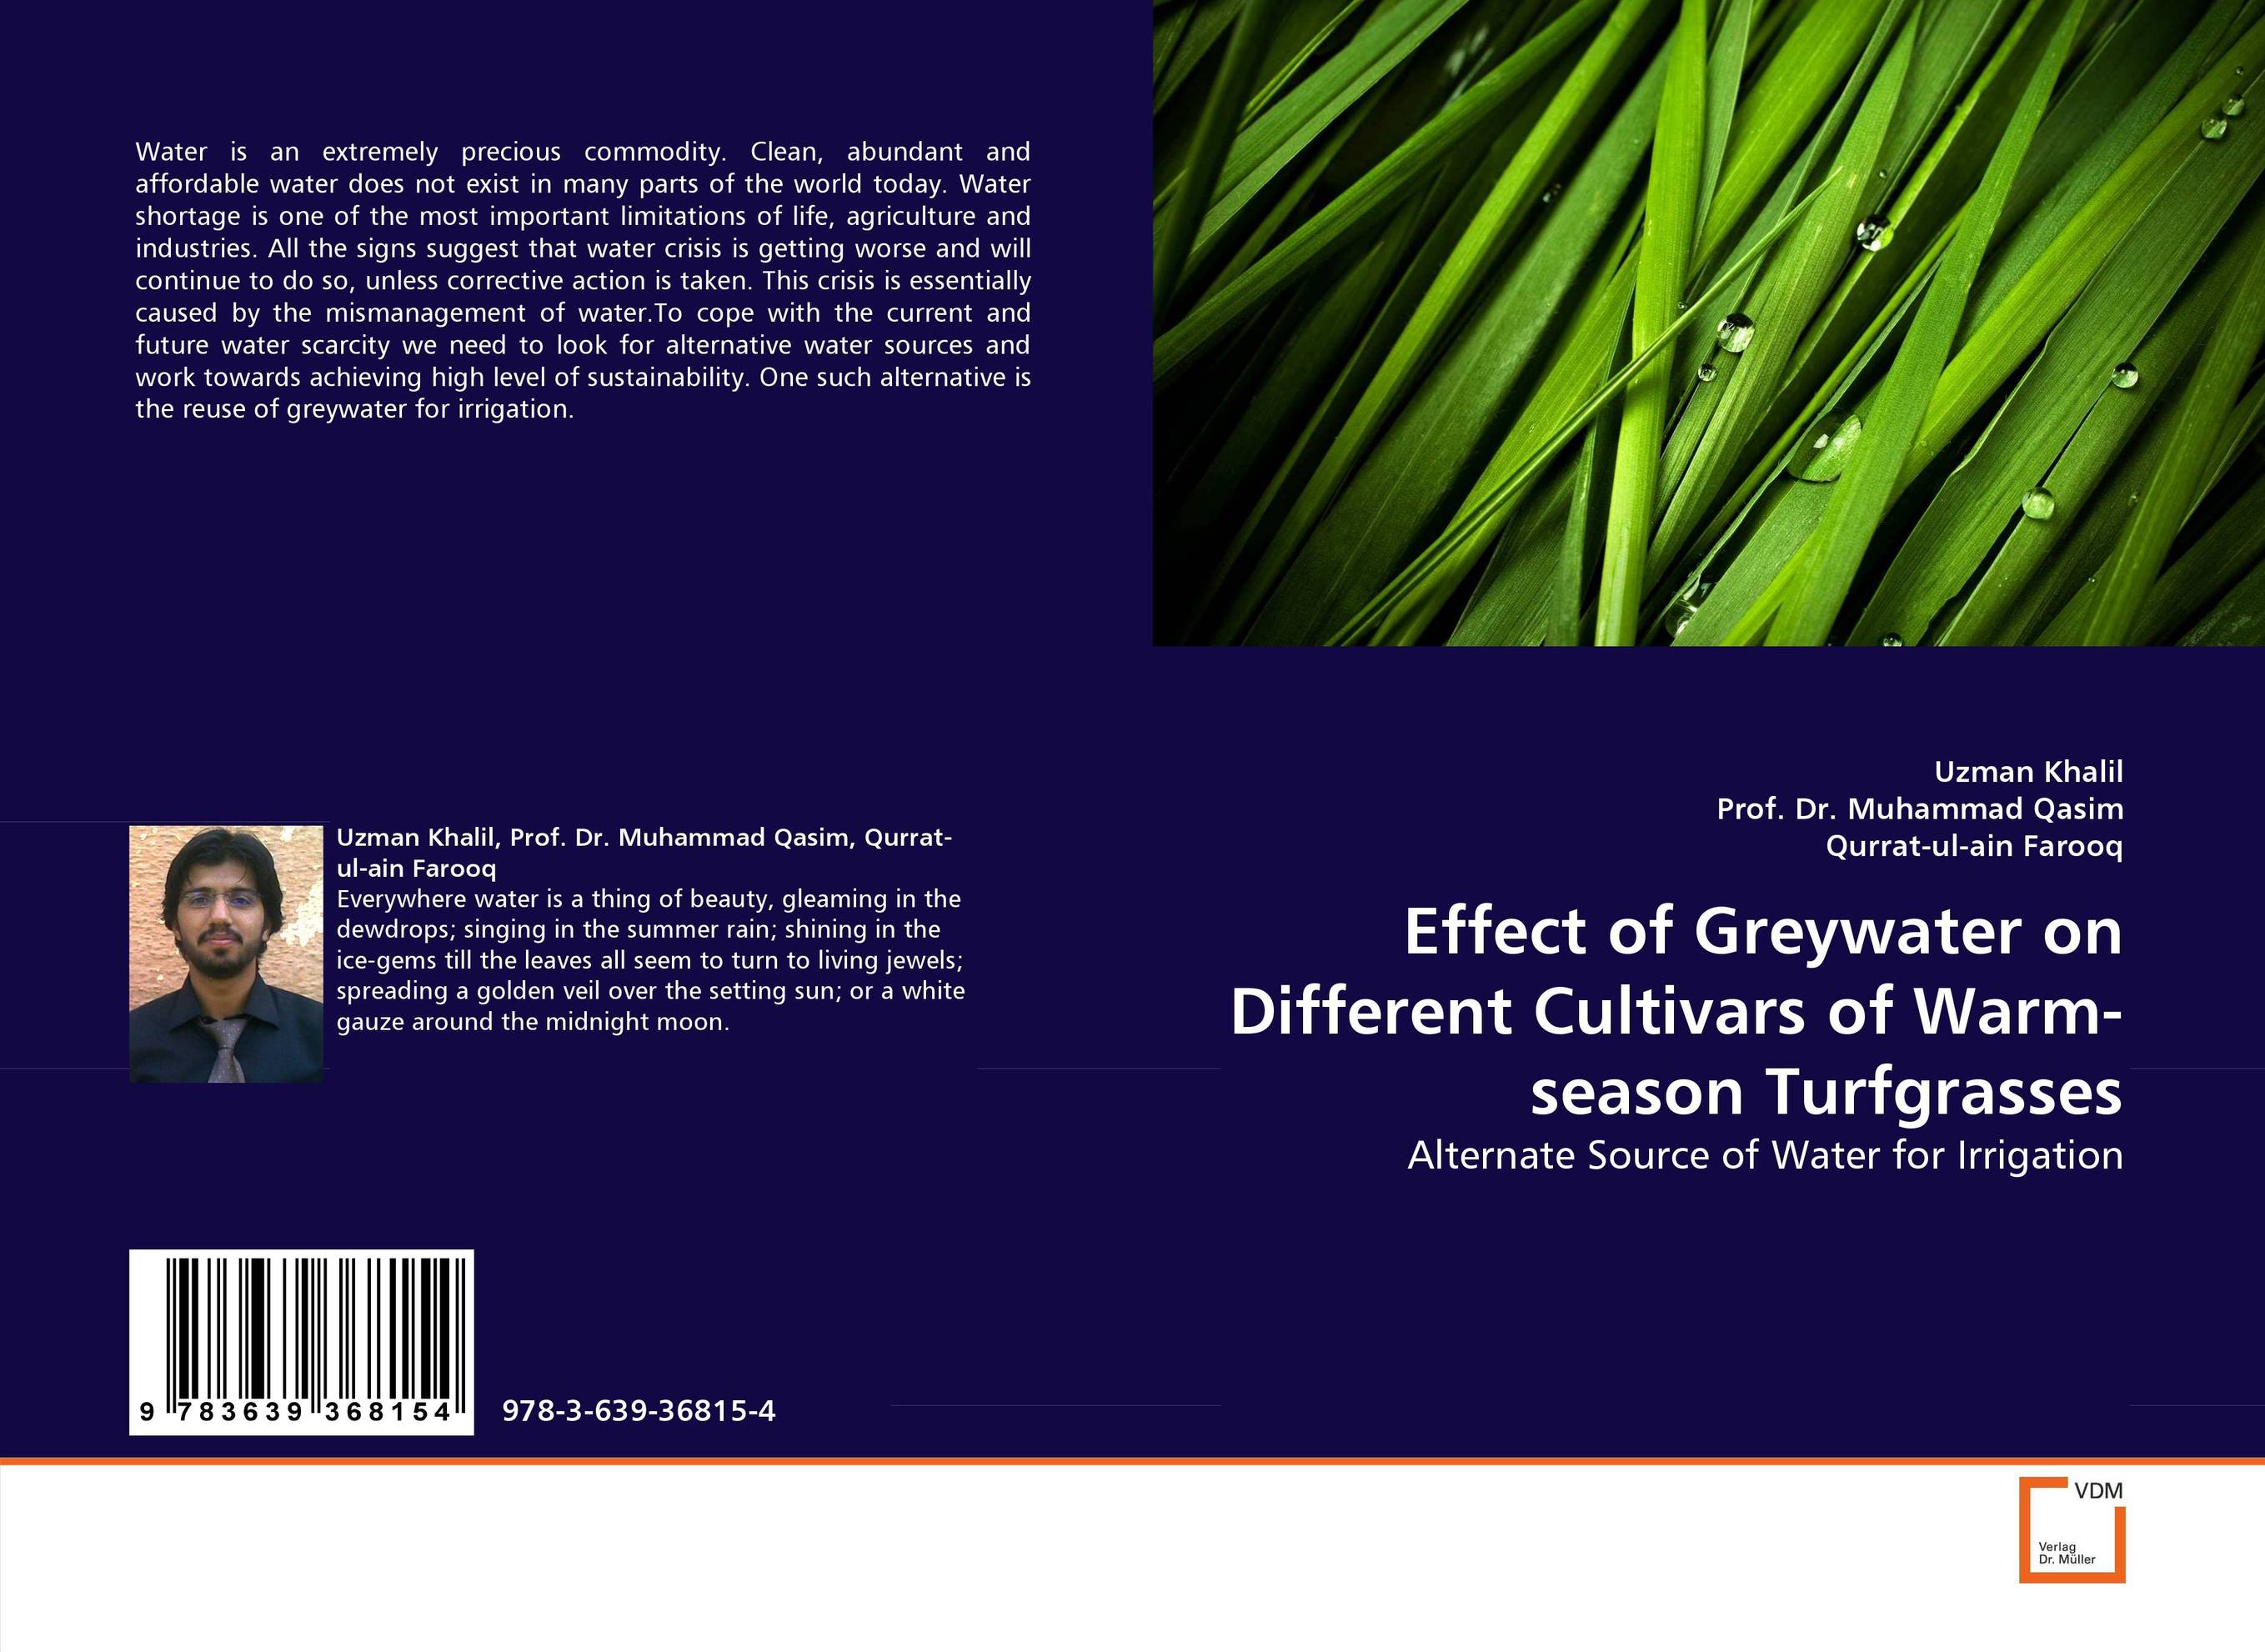 Effect of Greywater on Different Cultivars of Warm-season Turfgrasses